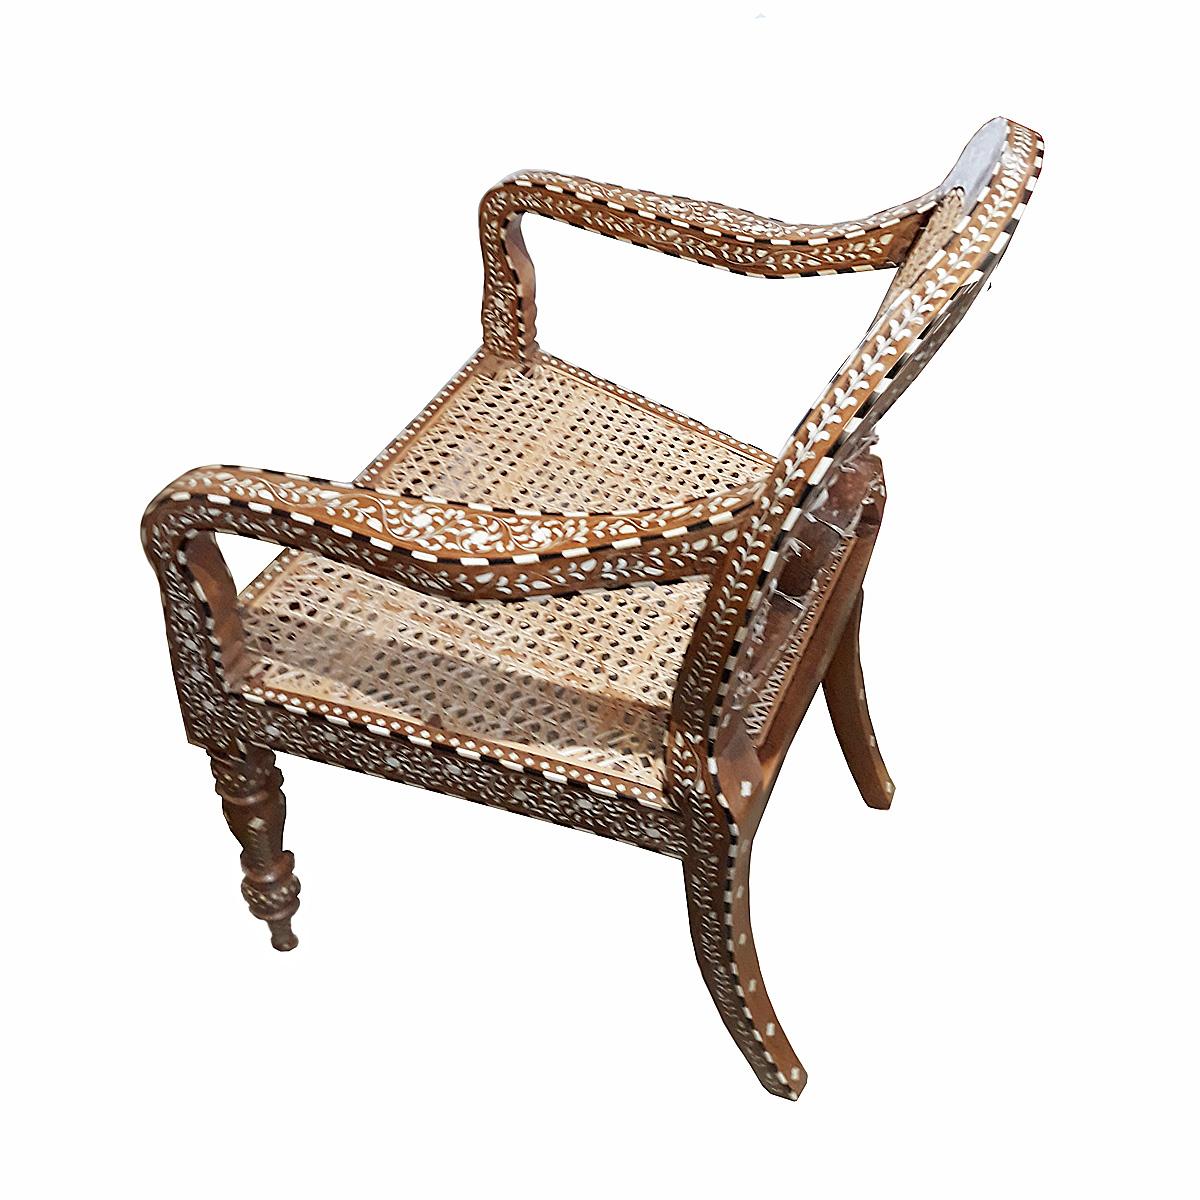 Bone-Inlaid Armchair from India 1